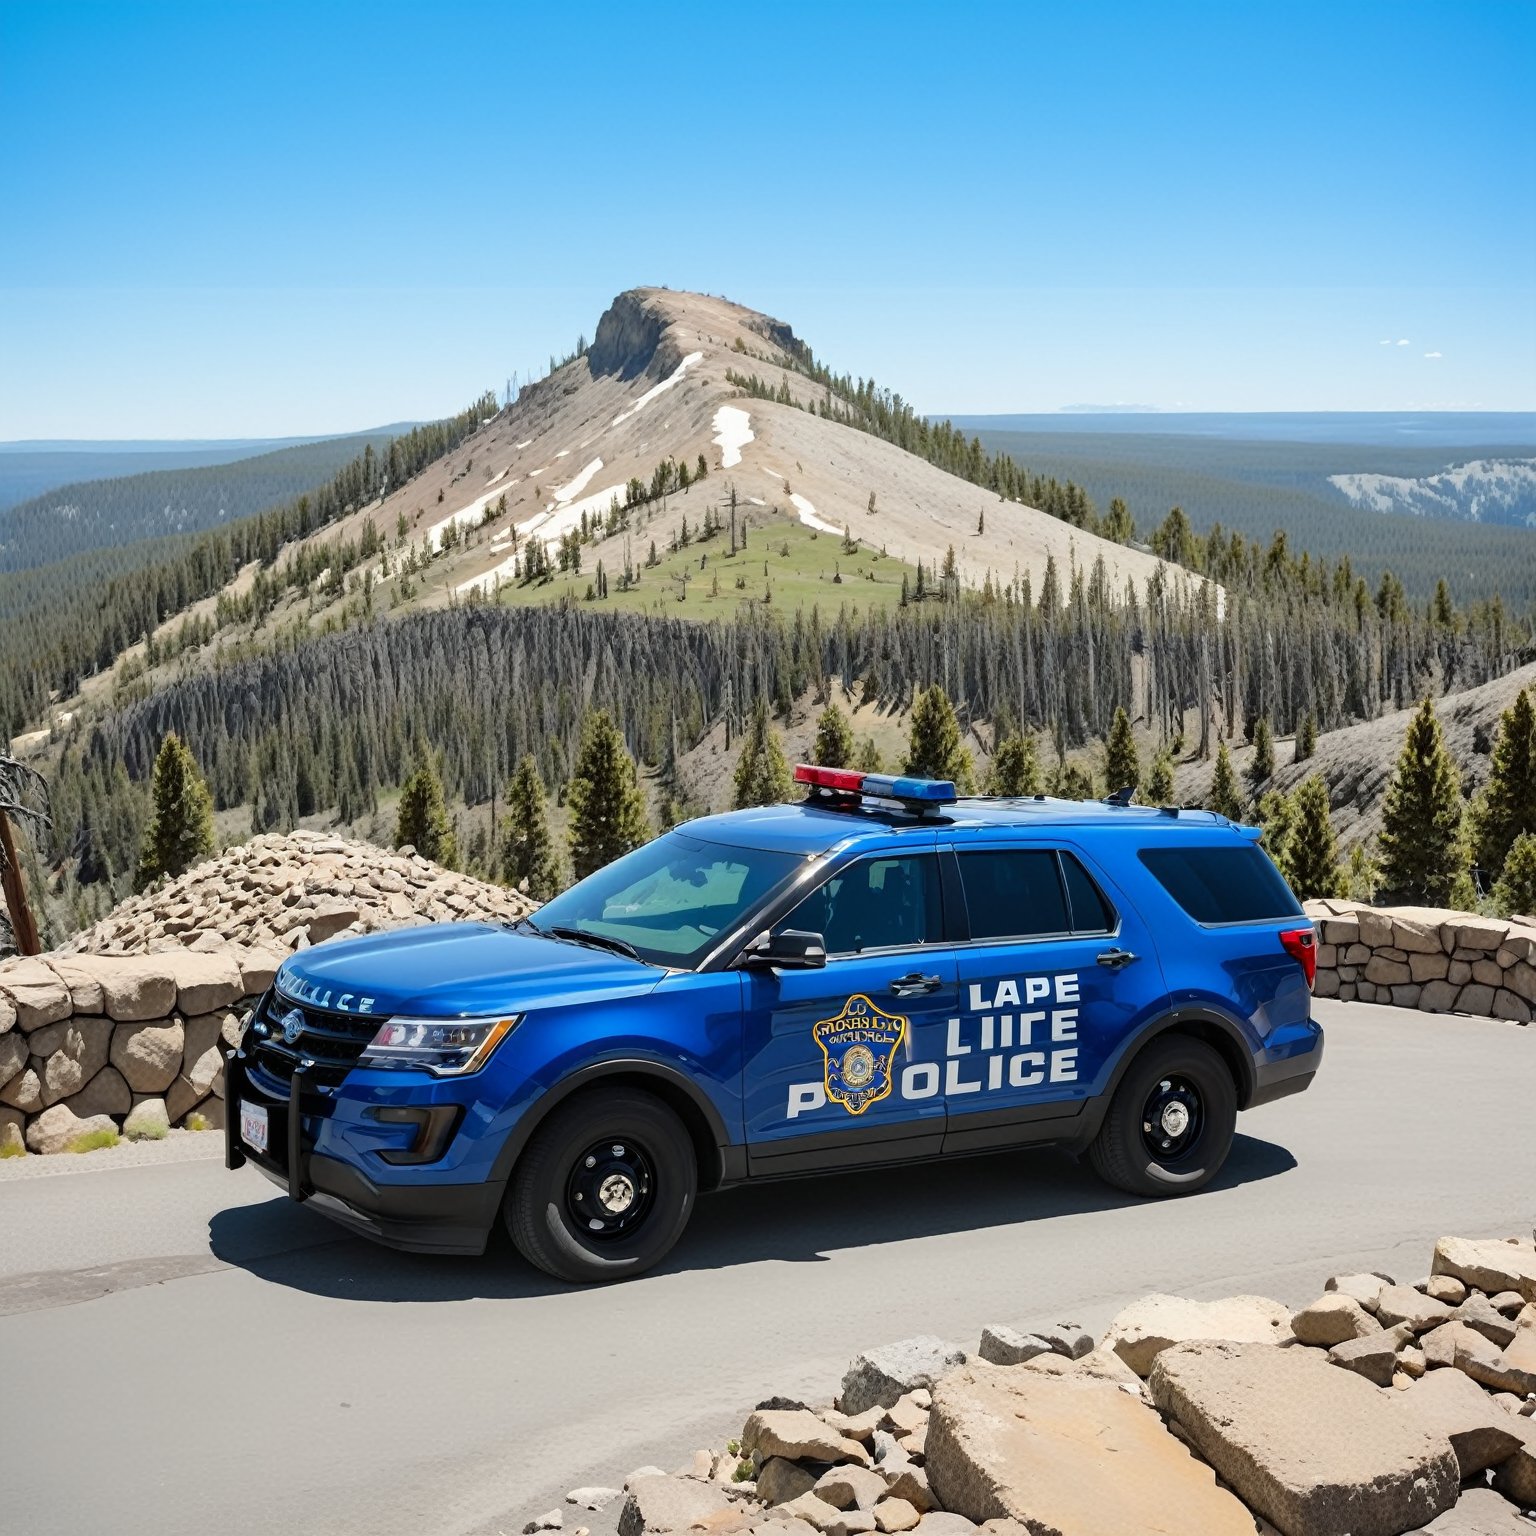 Hyper-Realistic photo of a beautiful LAPD police officer at  Yellowstone,20yo,1girl,solo,LAPD police uniform,cap,detailed exquisite face,soft shiny skin,smile,sunglasses,looking at viewer,Kristen Stewart lookalike,cap,fullbody:1.3
BREAK
backdrop:Mount Washburn Summit \(wash9urn\) in Yellowstone,summit at eye level,outdoors,blue sky,day,rock,horizon,green mountain,landscape,trail,tree,police car,(girl focus:1.3),cluttered maximalism
BREAK
settings: (rule of thirds1.3),perfect composition,studio photo,trending on artstation,depth of perspective,(Masterpiece,Best quality,32k,UHD:1.4),(sharp focus,high contrast,HDR,hyper-detailed,intricate details,ultra-realistic,kodachrome 800:1.3),(cinematic lighting:1.3),(by Karol Bak$,Alessandro Pautasso$,Gustav Klimt$ and Hayao Miyazaki$:1.3),art_booster,photo_b00ster, real_booster,Ye11owst0ne